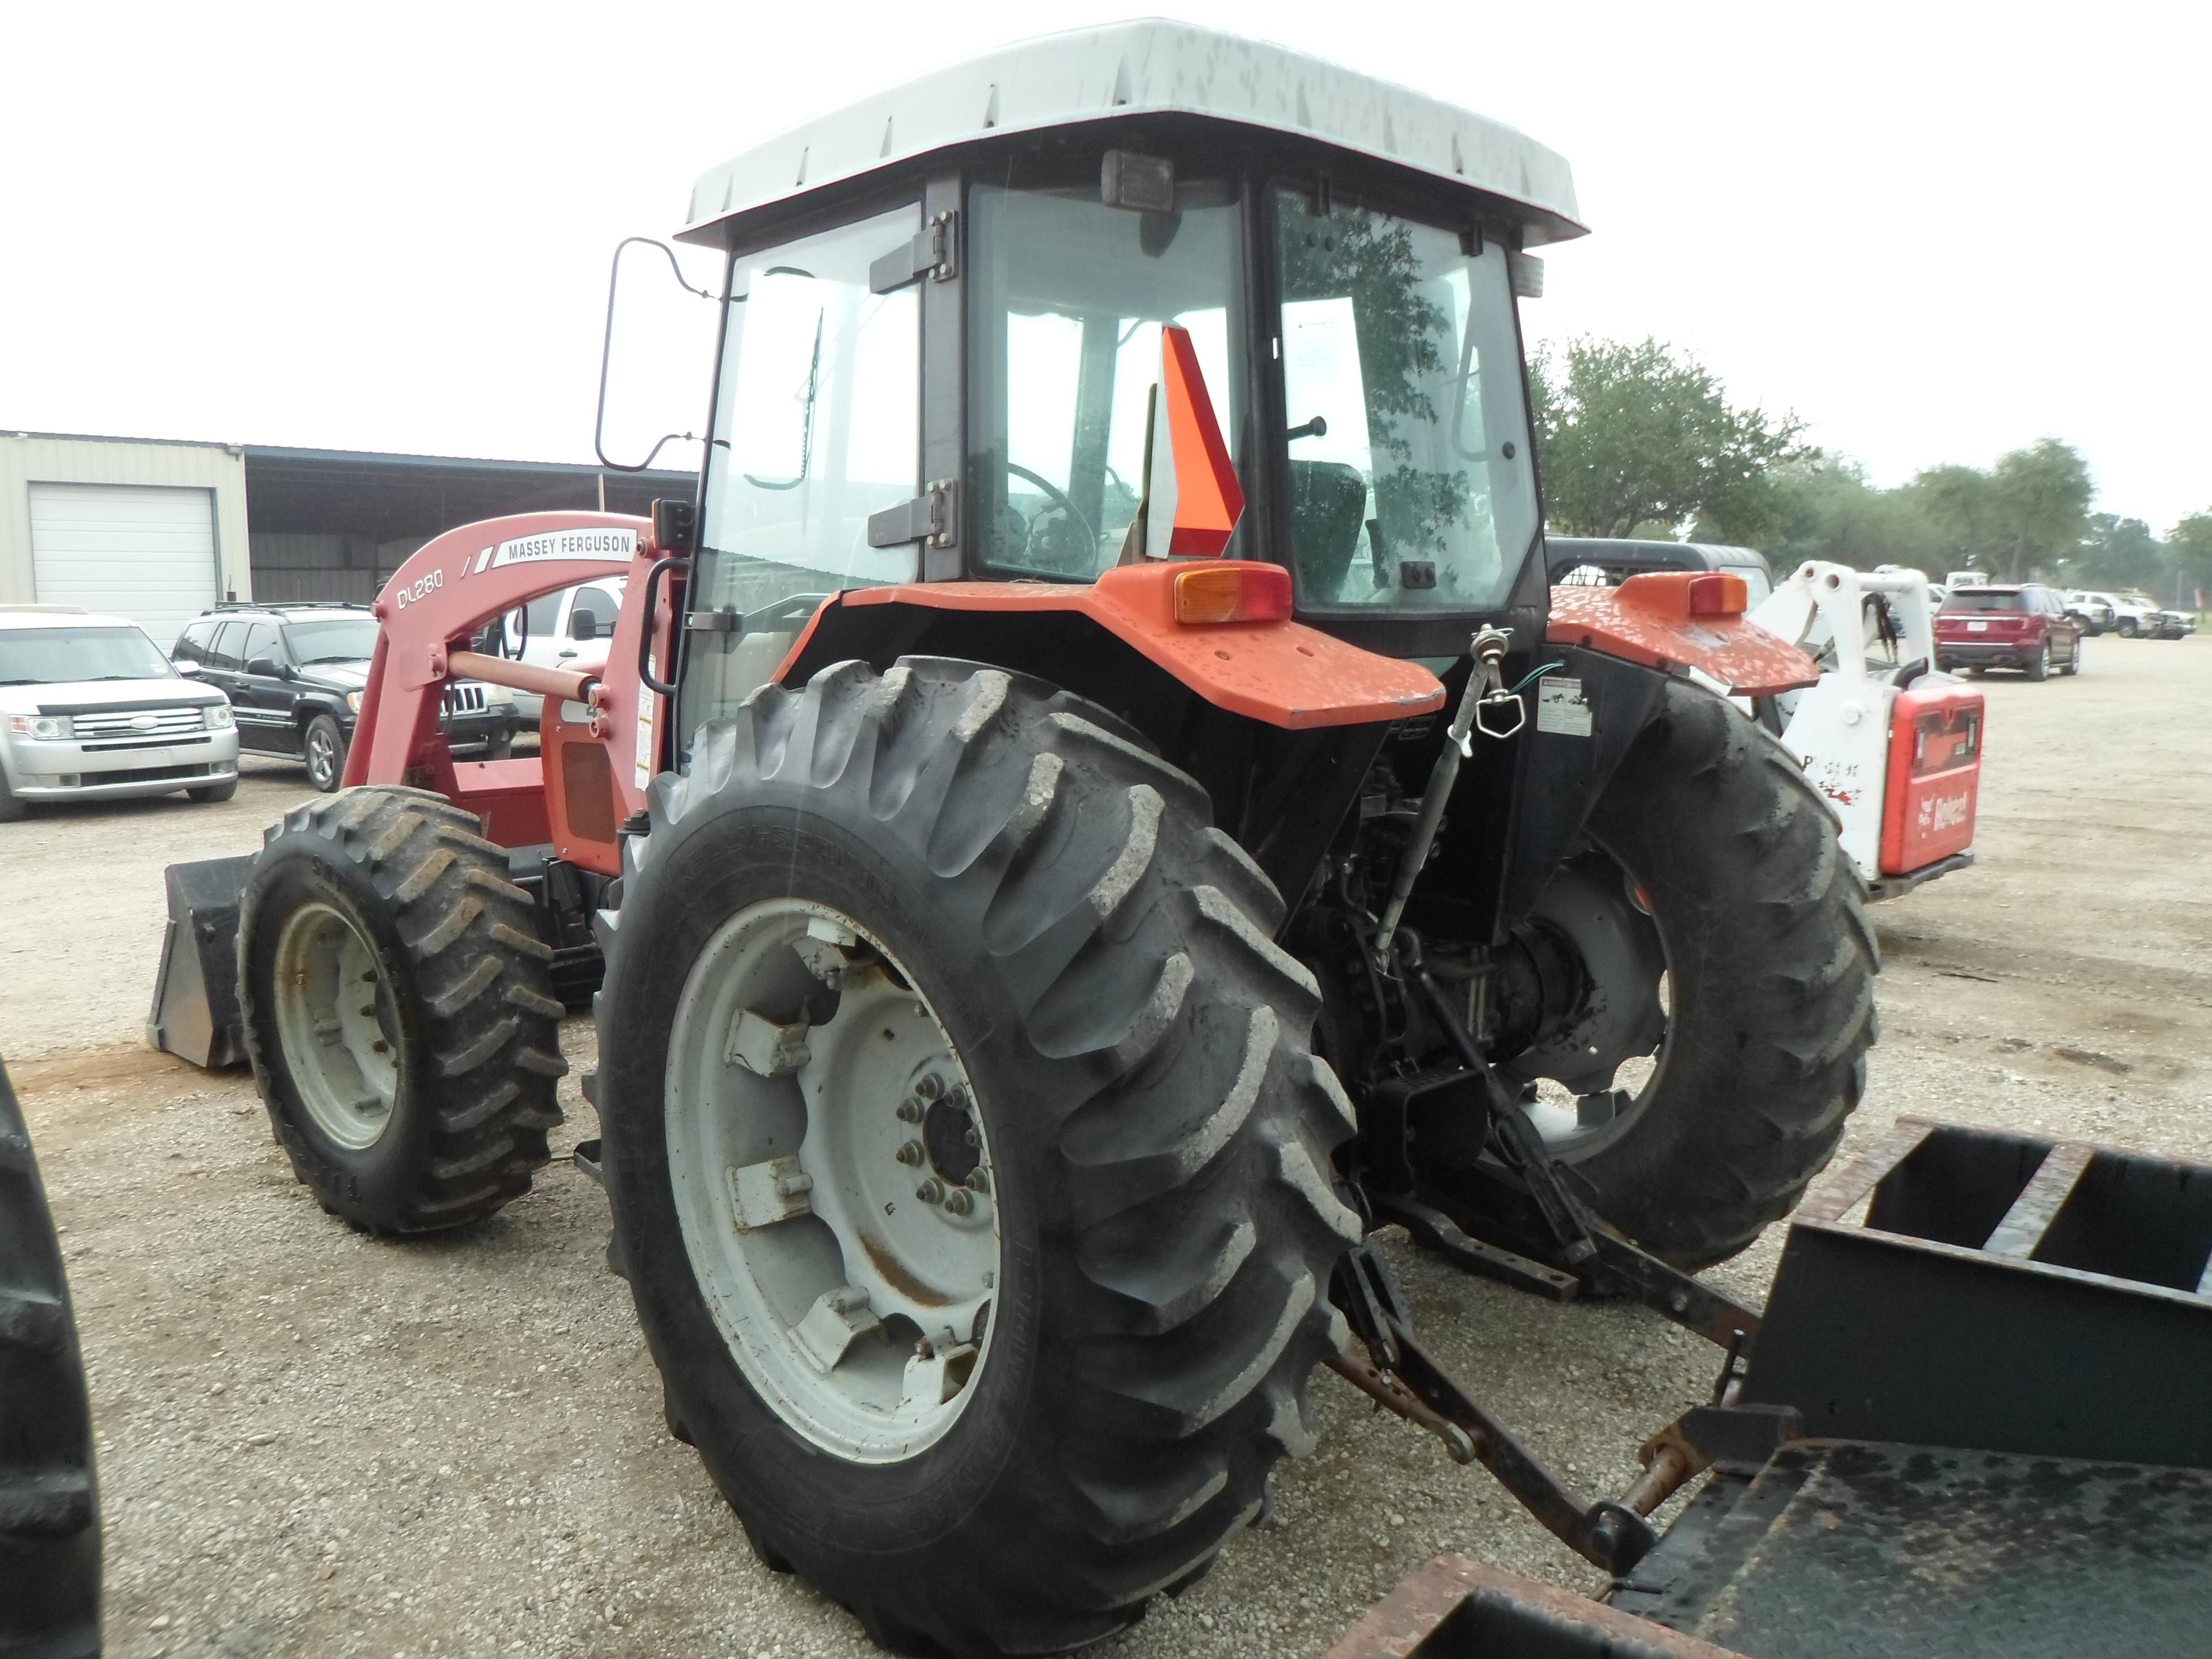 MF 492 TRACTOR W/ MF DL280 LOADER (SERIAL # 000T492405C00715) (SHOWING APPX 5,249 HOURS, UP TO THE B